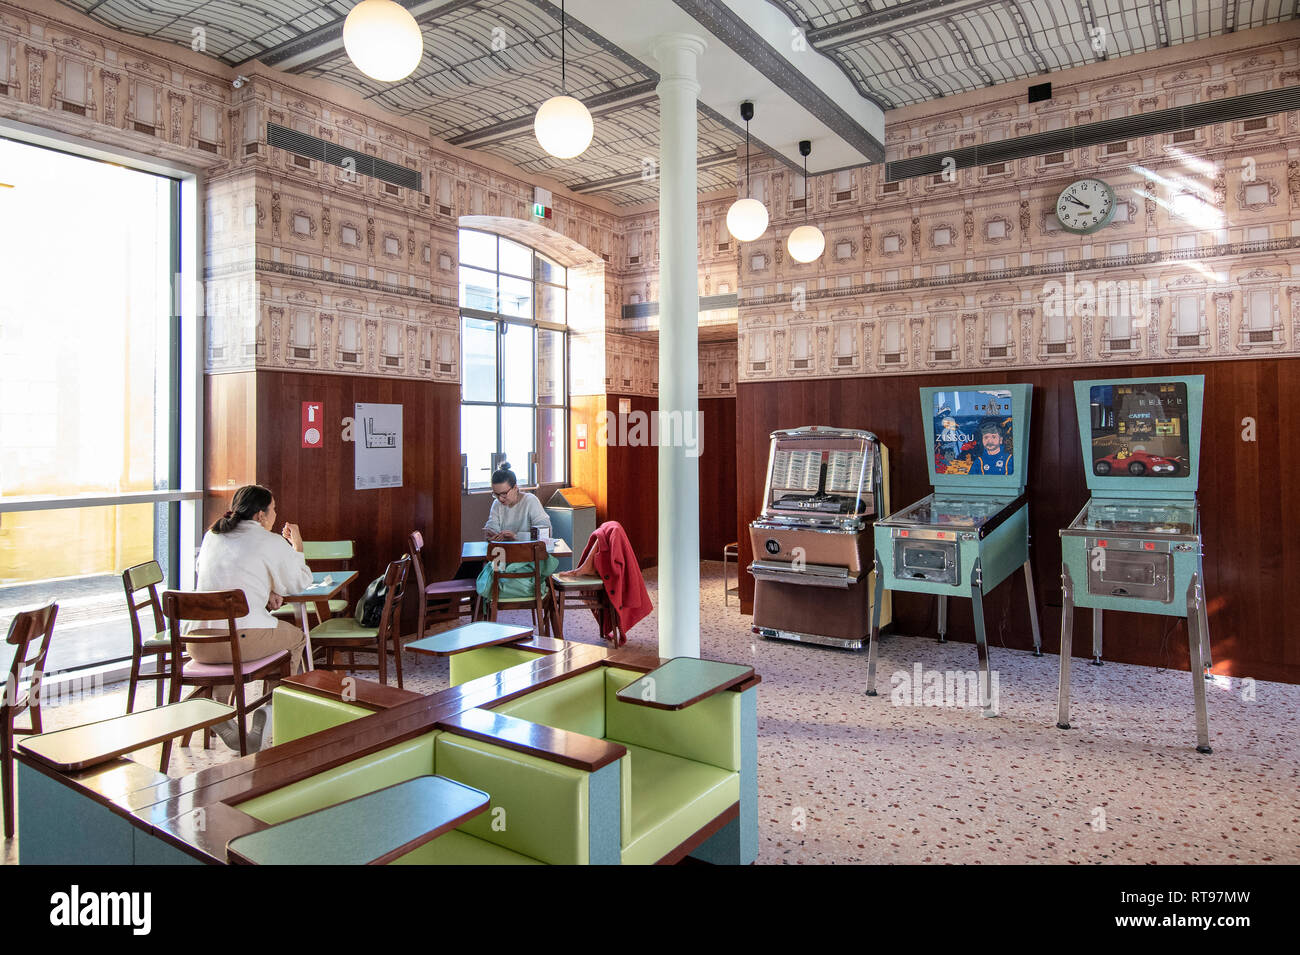 Retro-looking interiors and formica pastel furniture at Bar Luce, Wes Anderson-inspired bar and cafe in the Fondazione Prada district of Milan, Italy Stock Photo